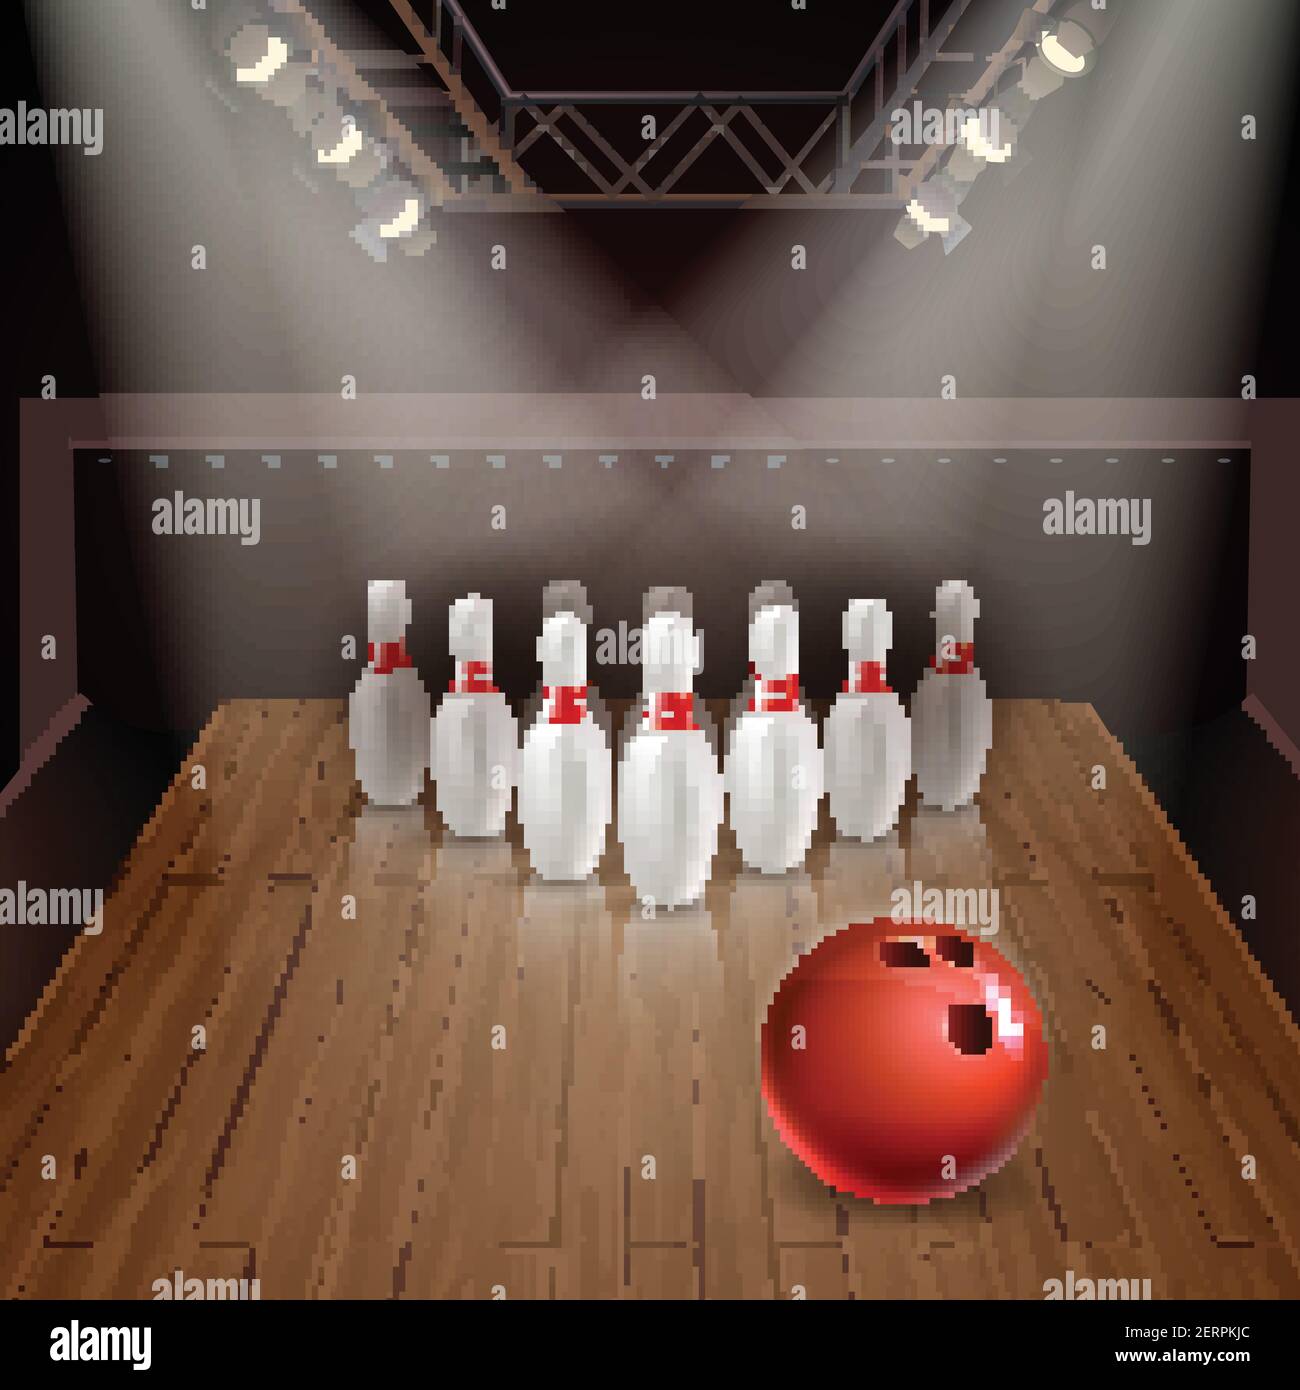 Bowling lane with exposed skittles and red ball under spotlights 3d vector illustration Stock Vector